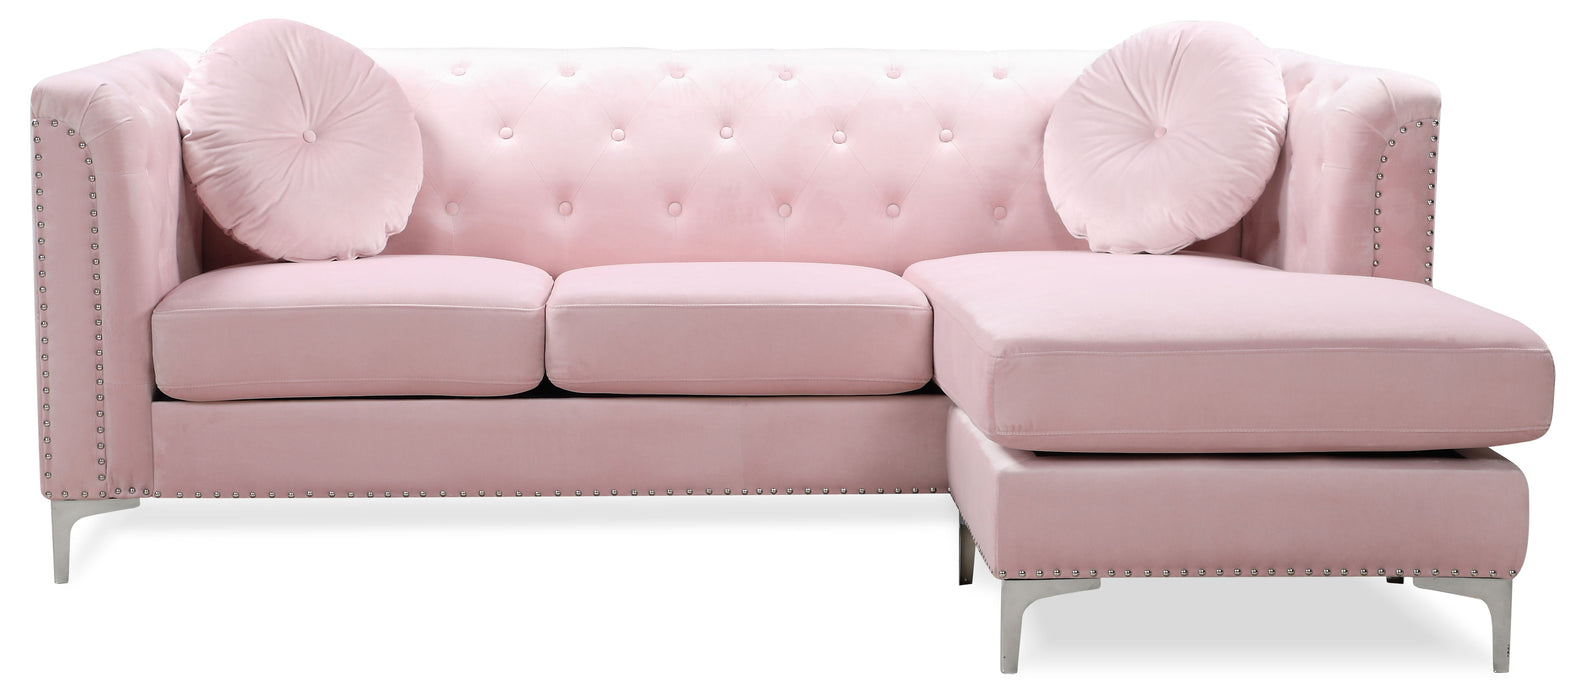 Glory Furniture Pompano Sofa Chaise (3 Boxes), Pink